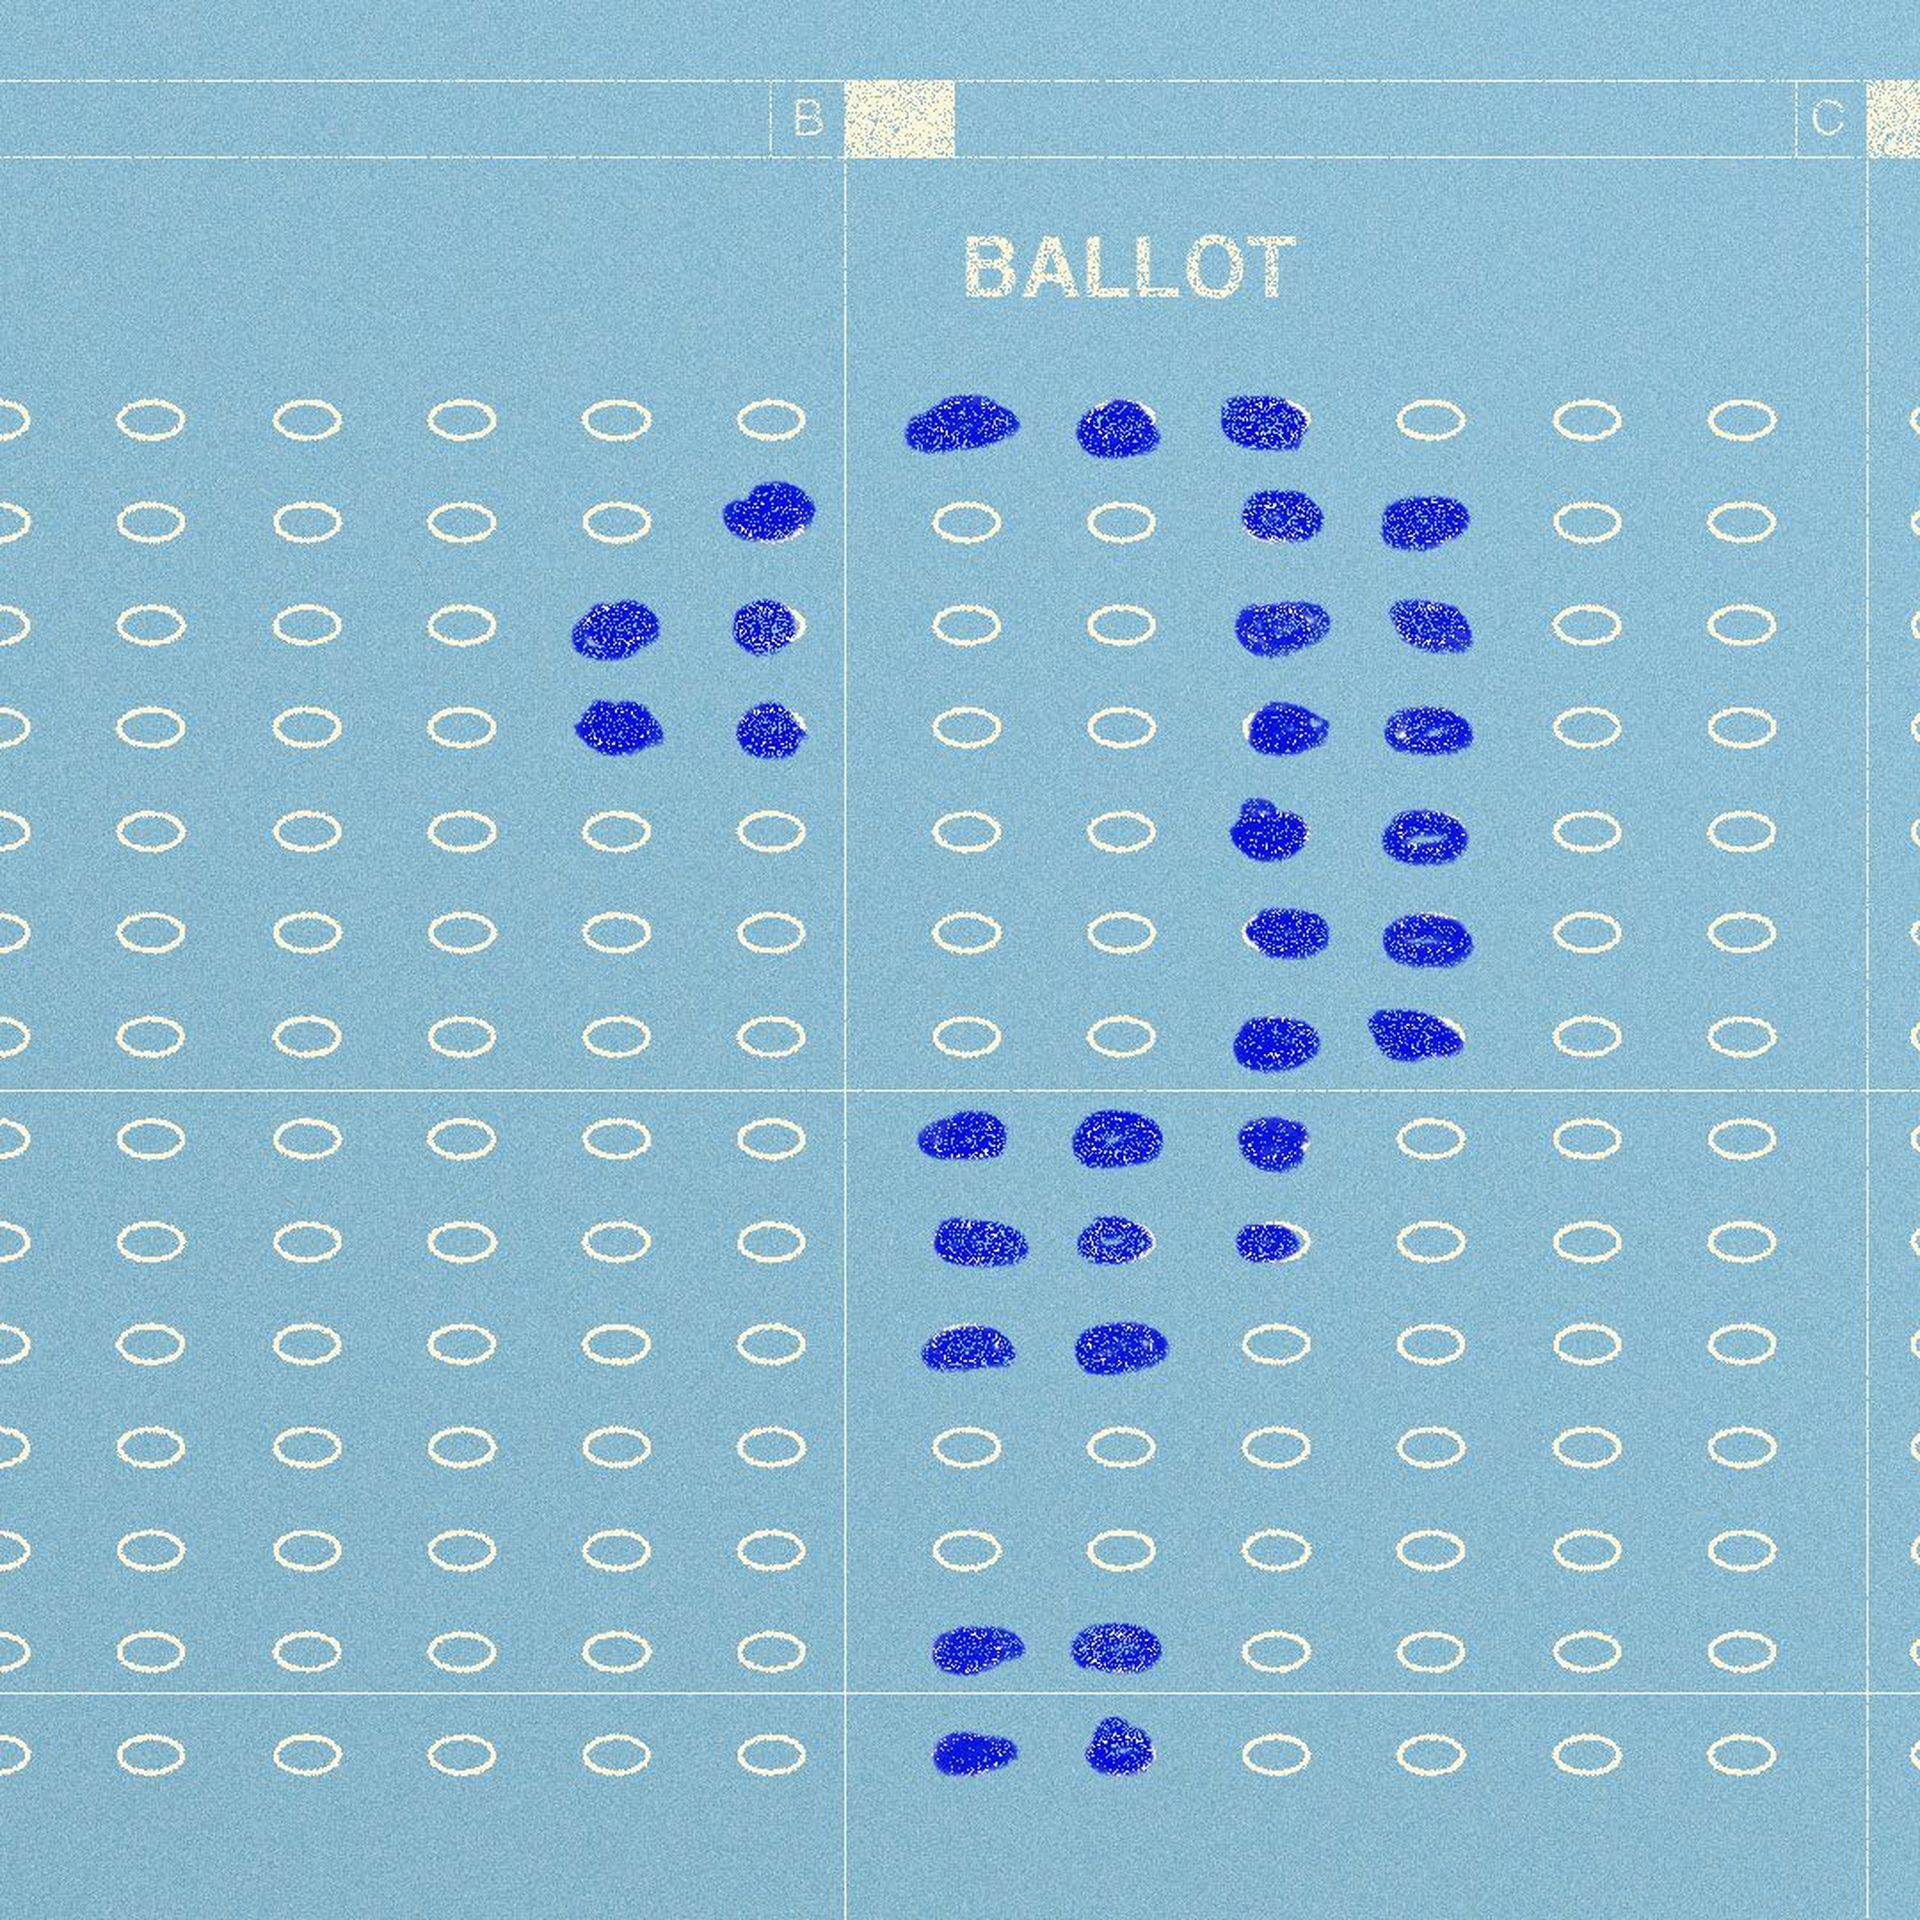 Illustration of a ballot filled in to create a question mark